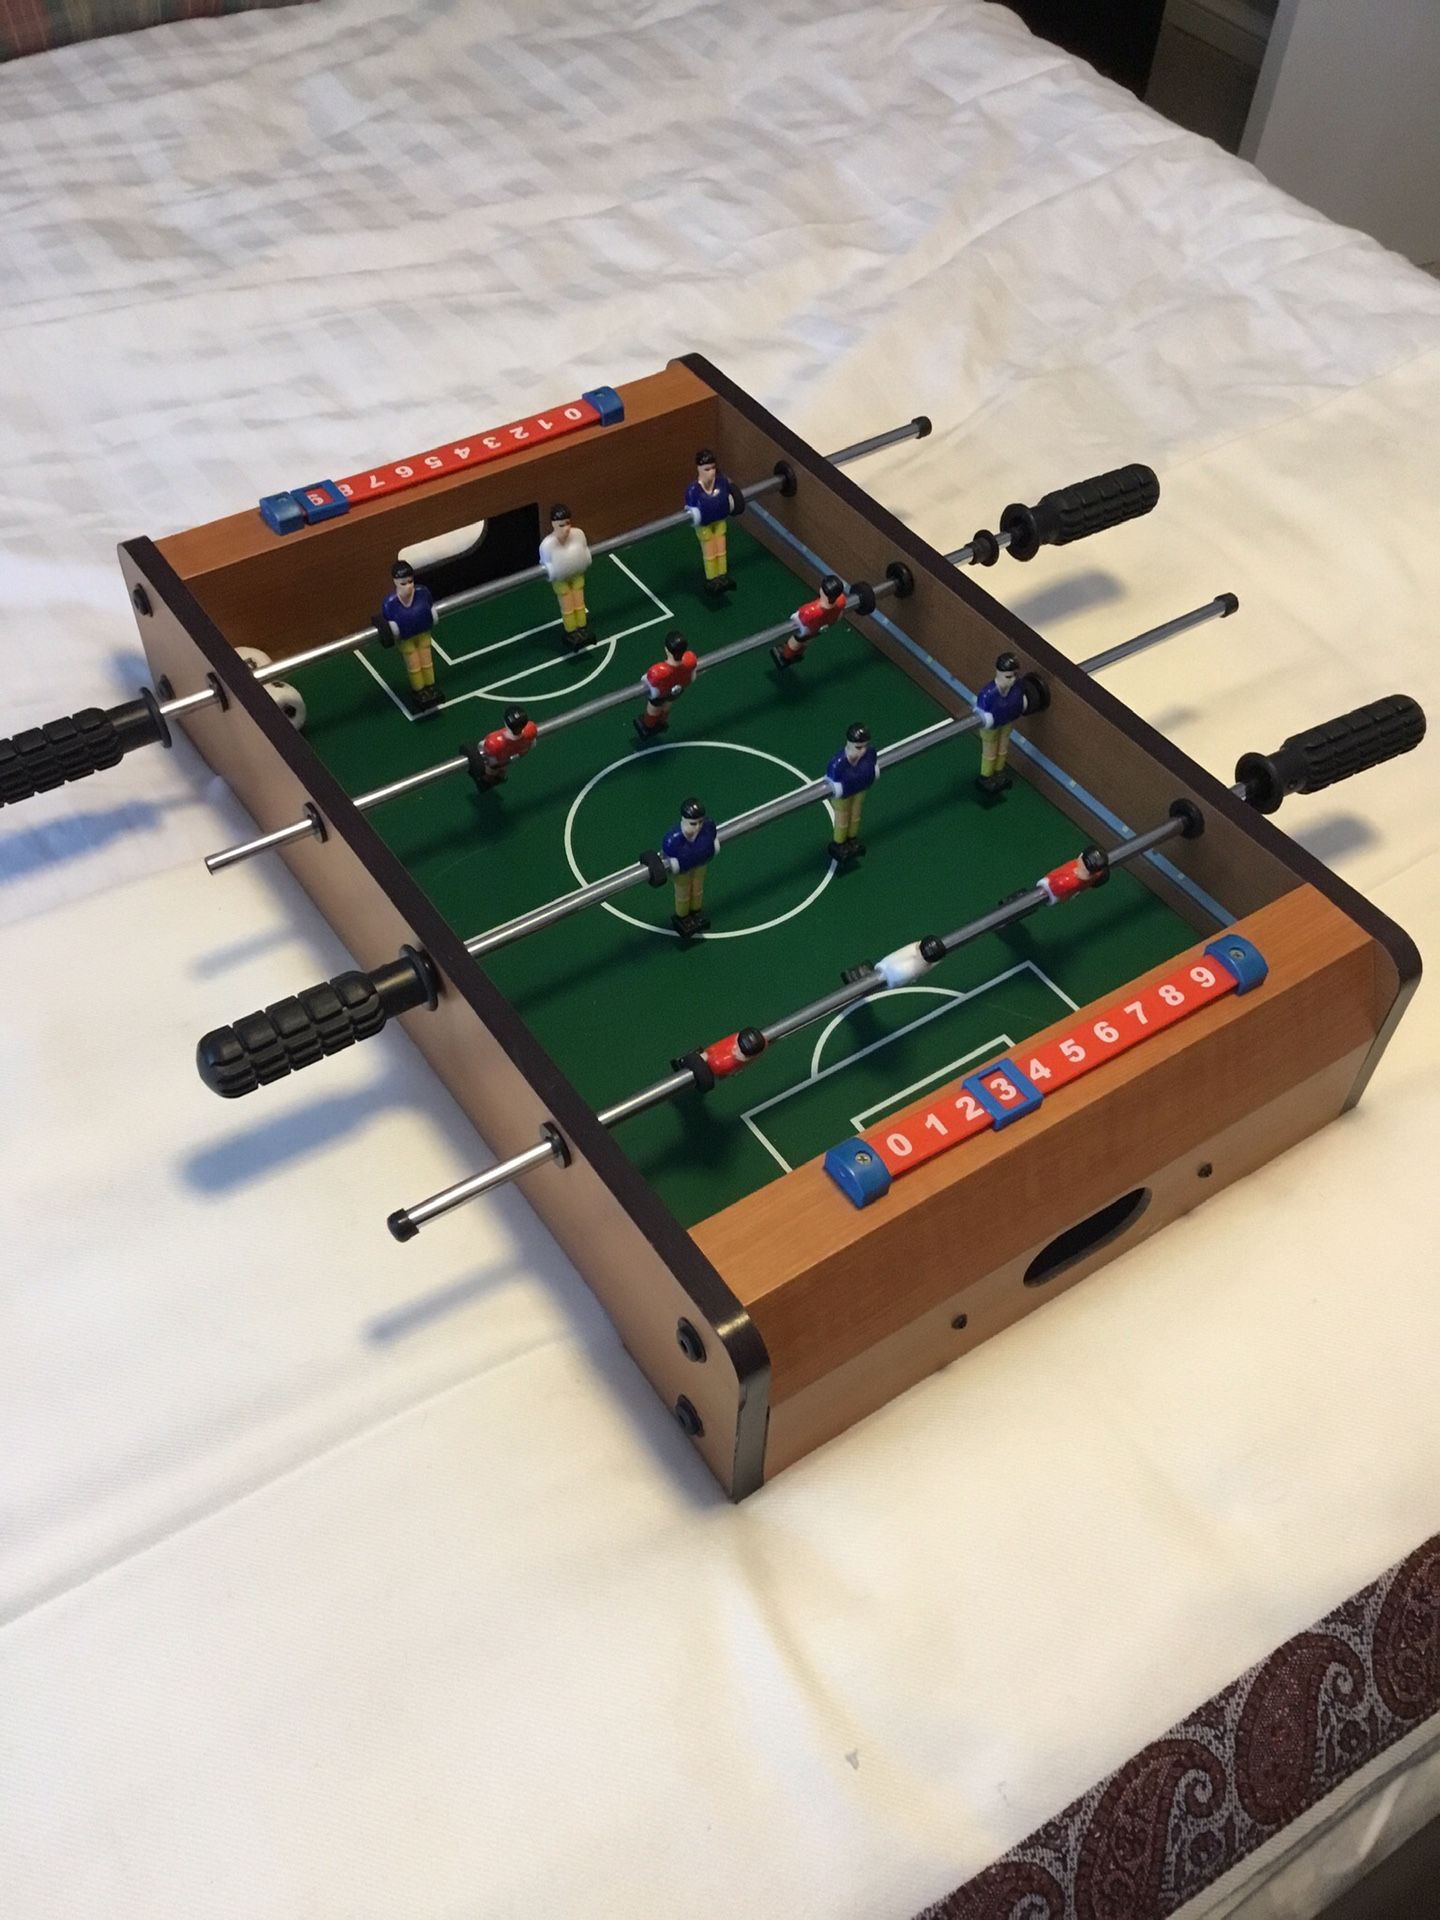 20 inch mini Tabletop foosball / soccer game, complete with 2 balls.